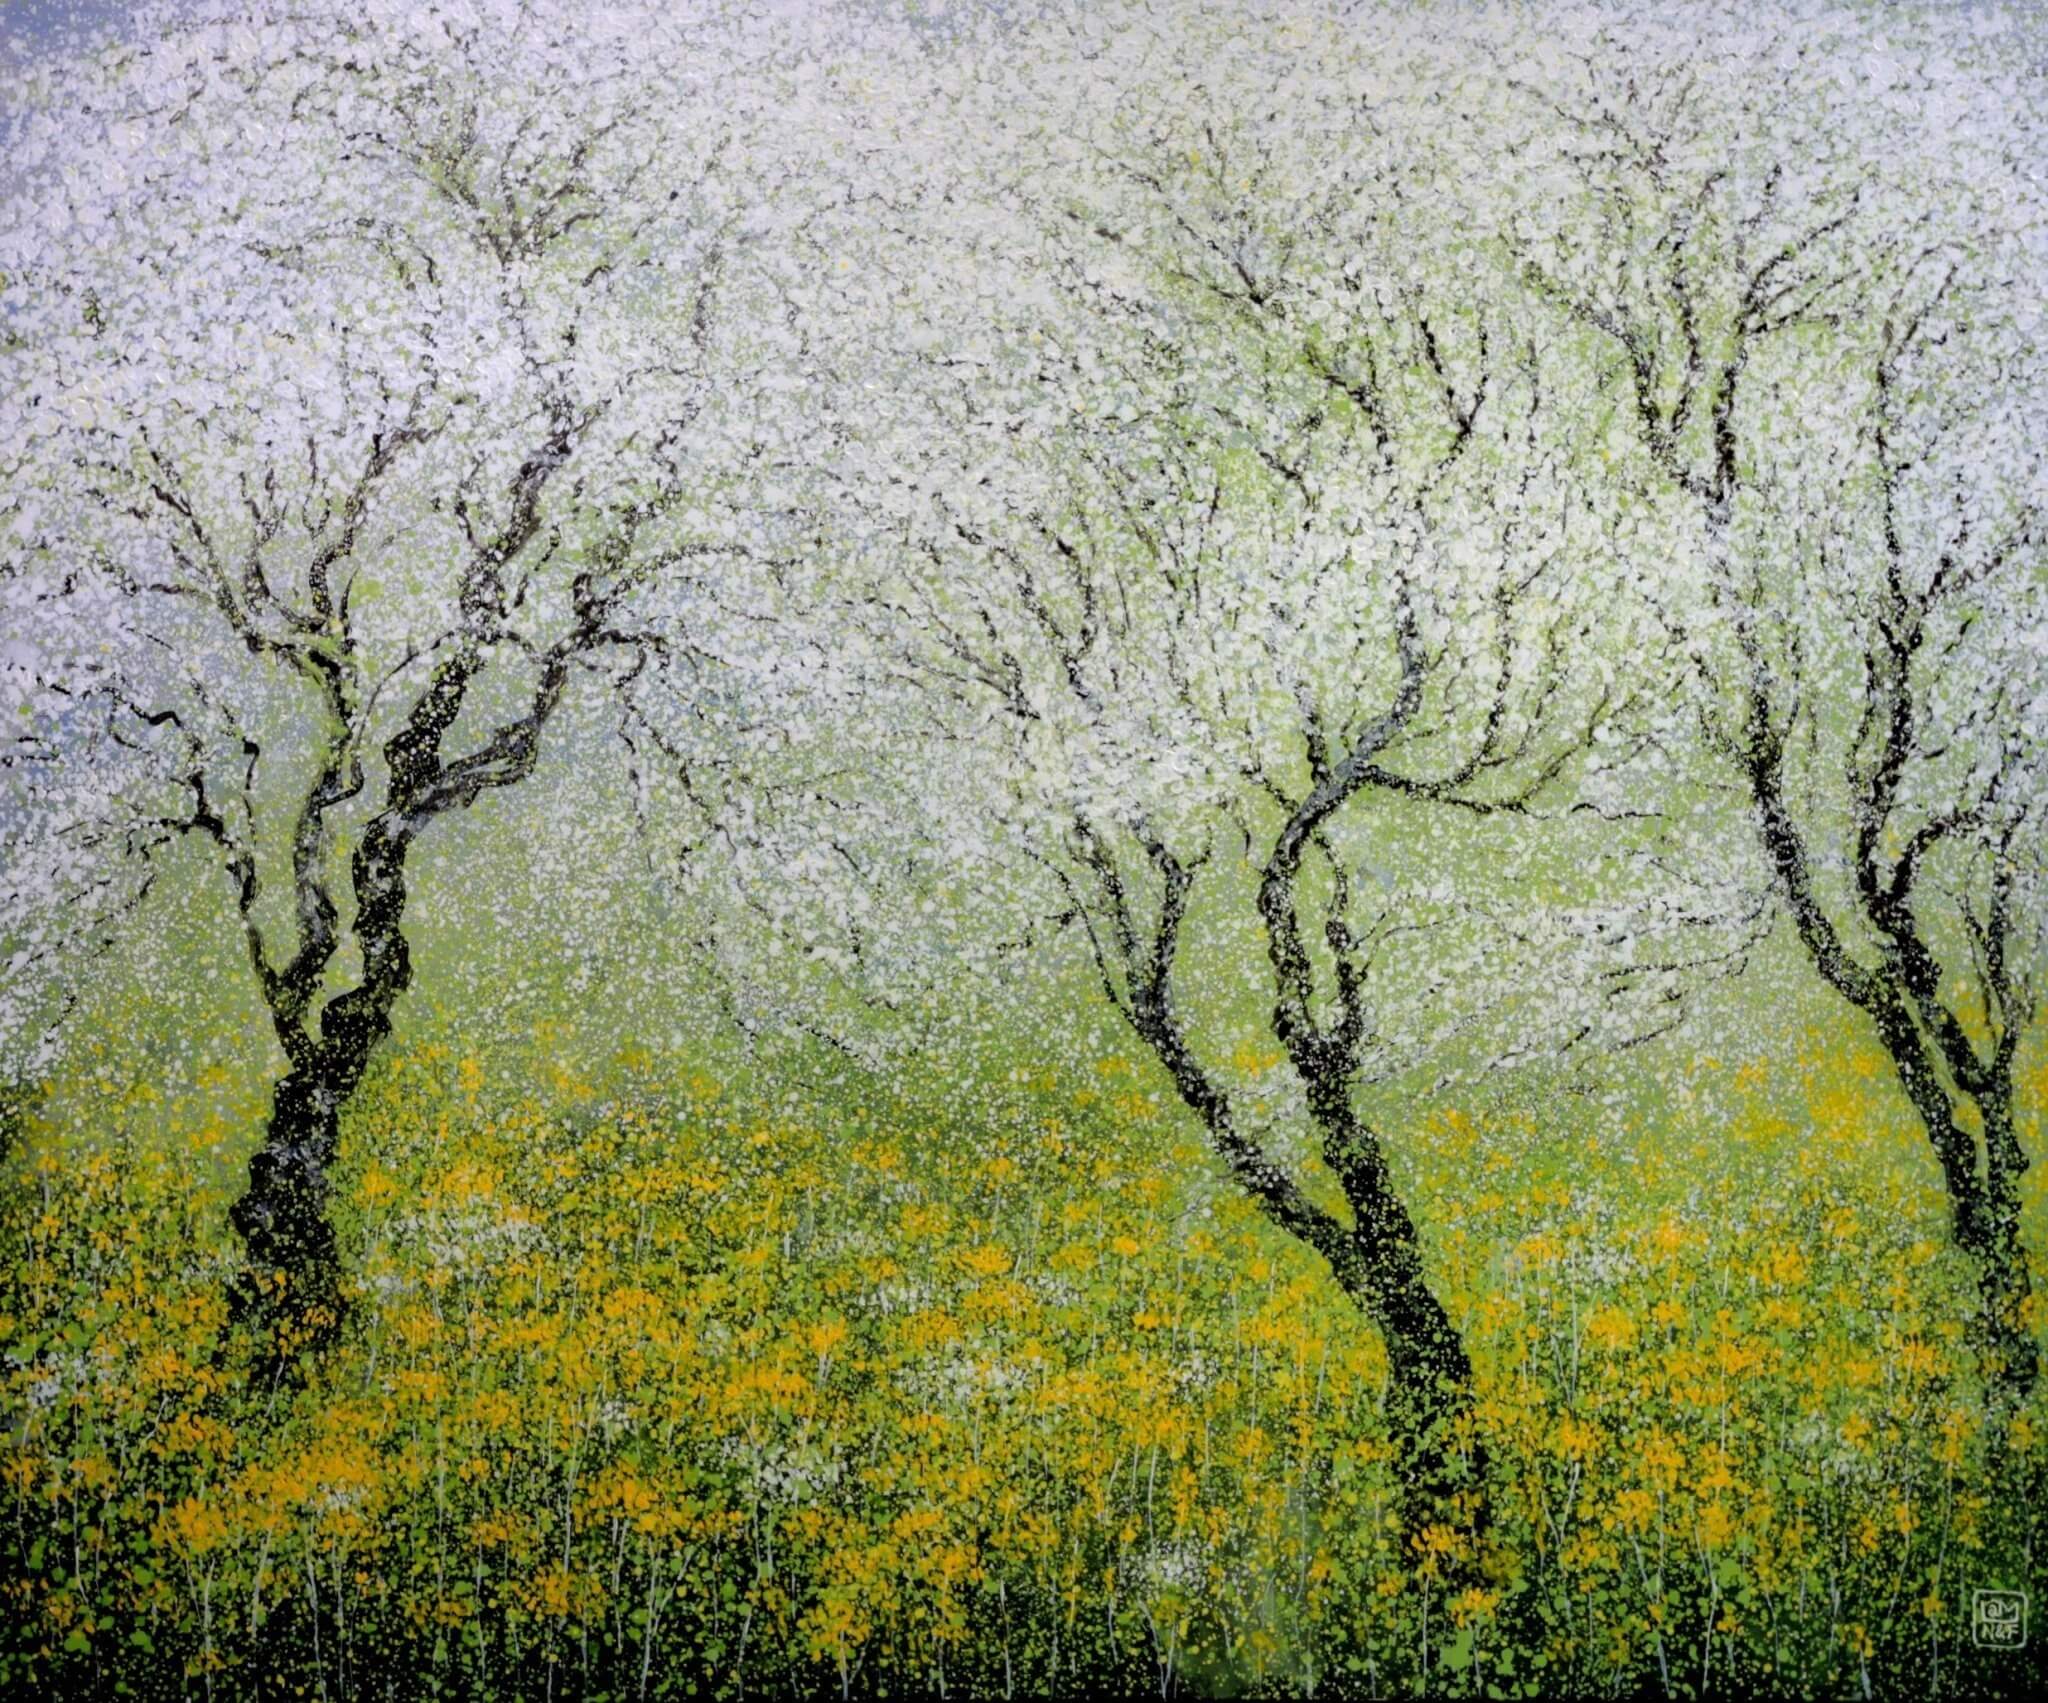 Spring Garden Vietnamese acrylic painting by artist Nguyen Lam